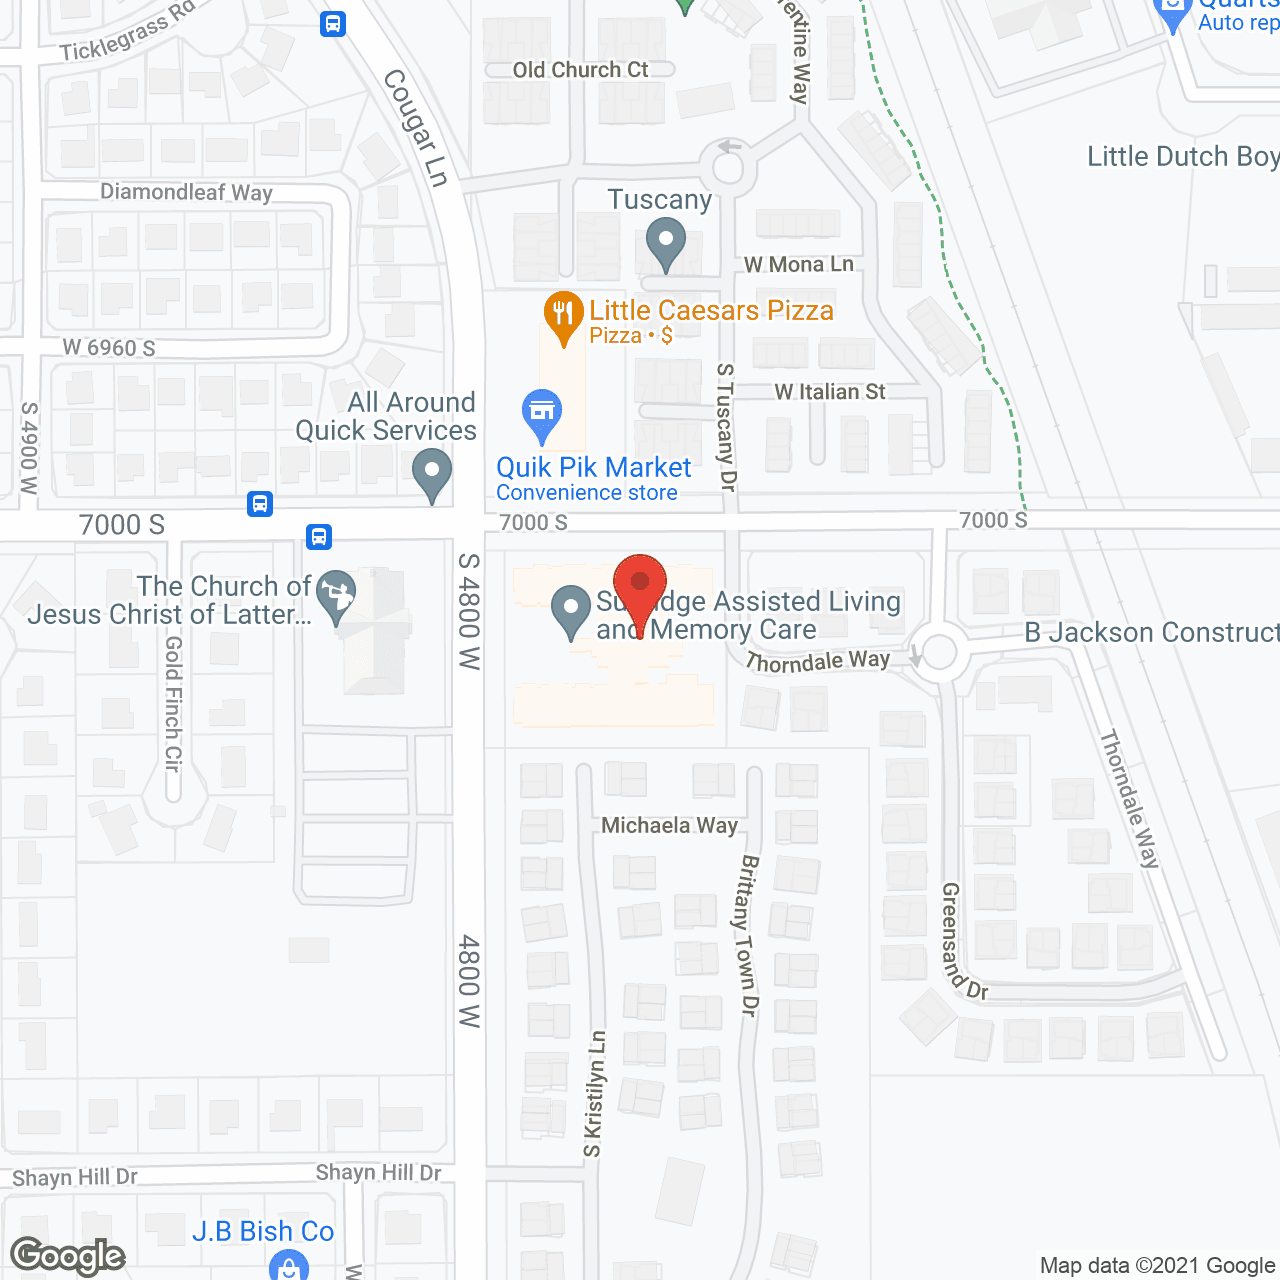 Sunridge Assisted Living and Memory Care in google map